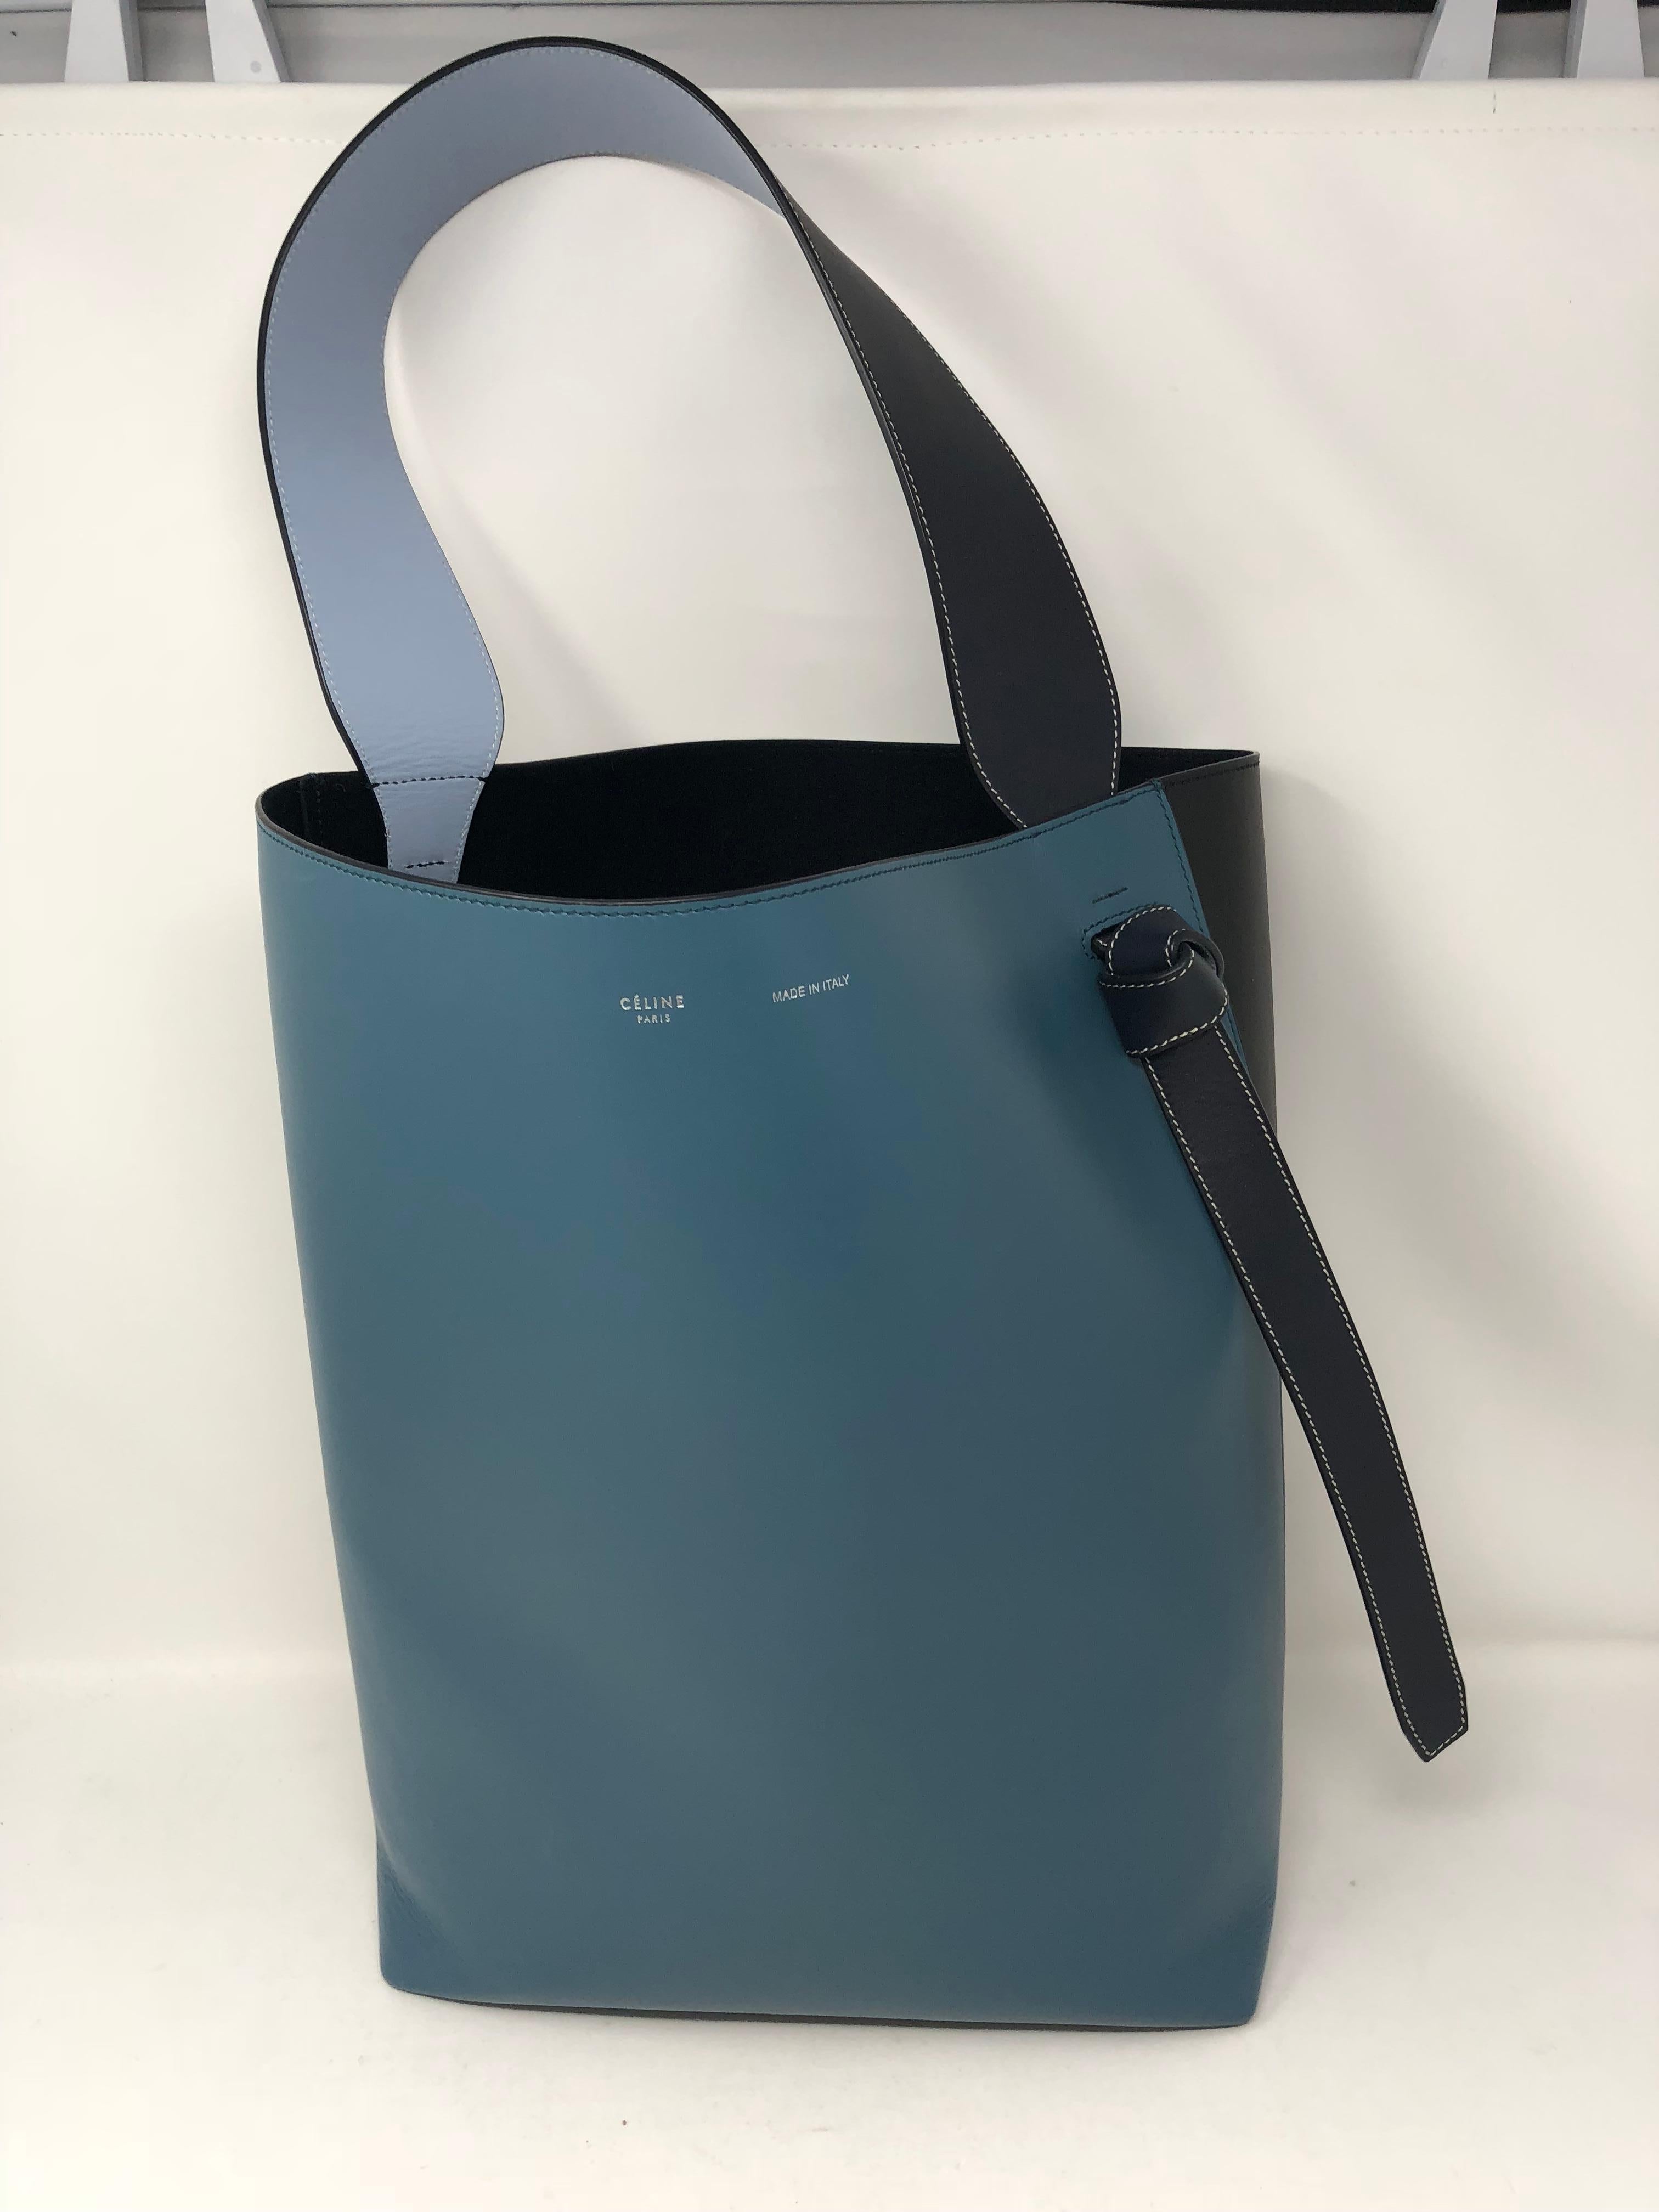 Celine Blue Bucket Style Bag with trio colors. Blue, black and light blue. New condition. Comes with interior clutch/pouch. Smooth leather bag. Guaranteed authentic. 